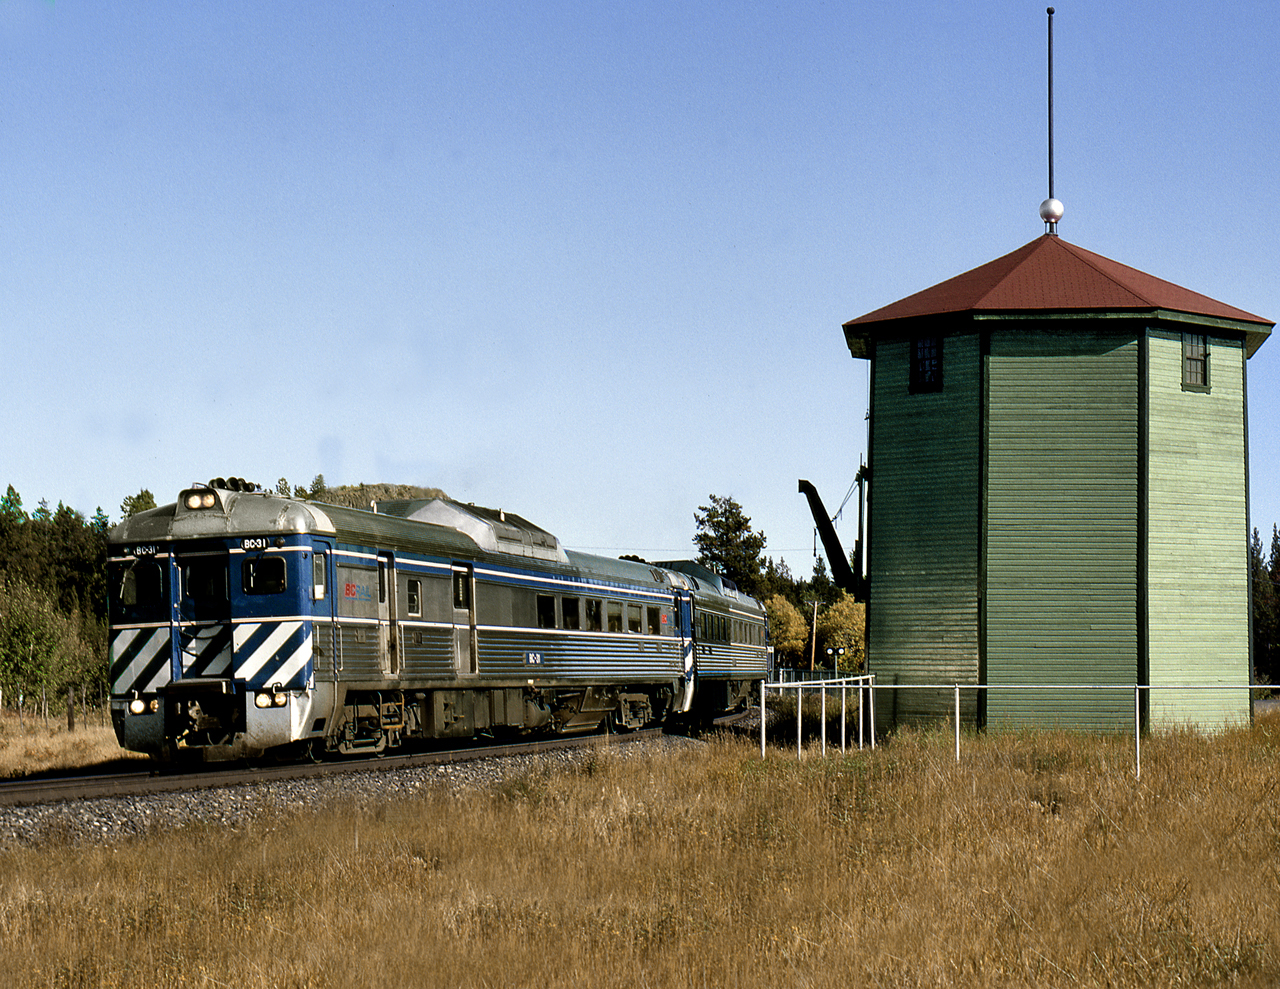 BCOL southbound train 2 passes the preserved water tank at Lone Butte in B.C.'s Cariboo district